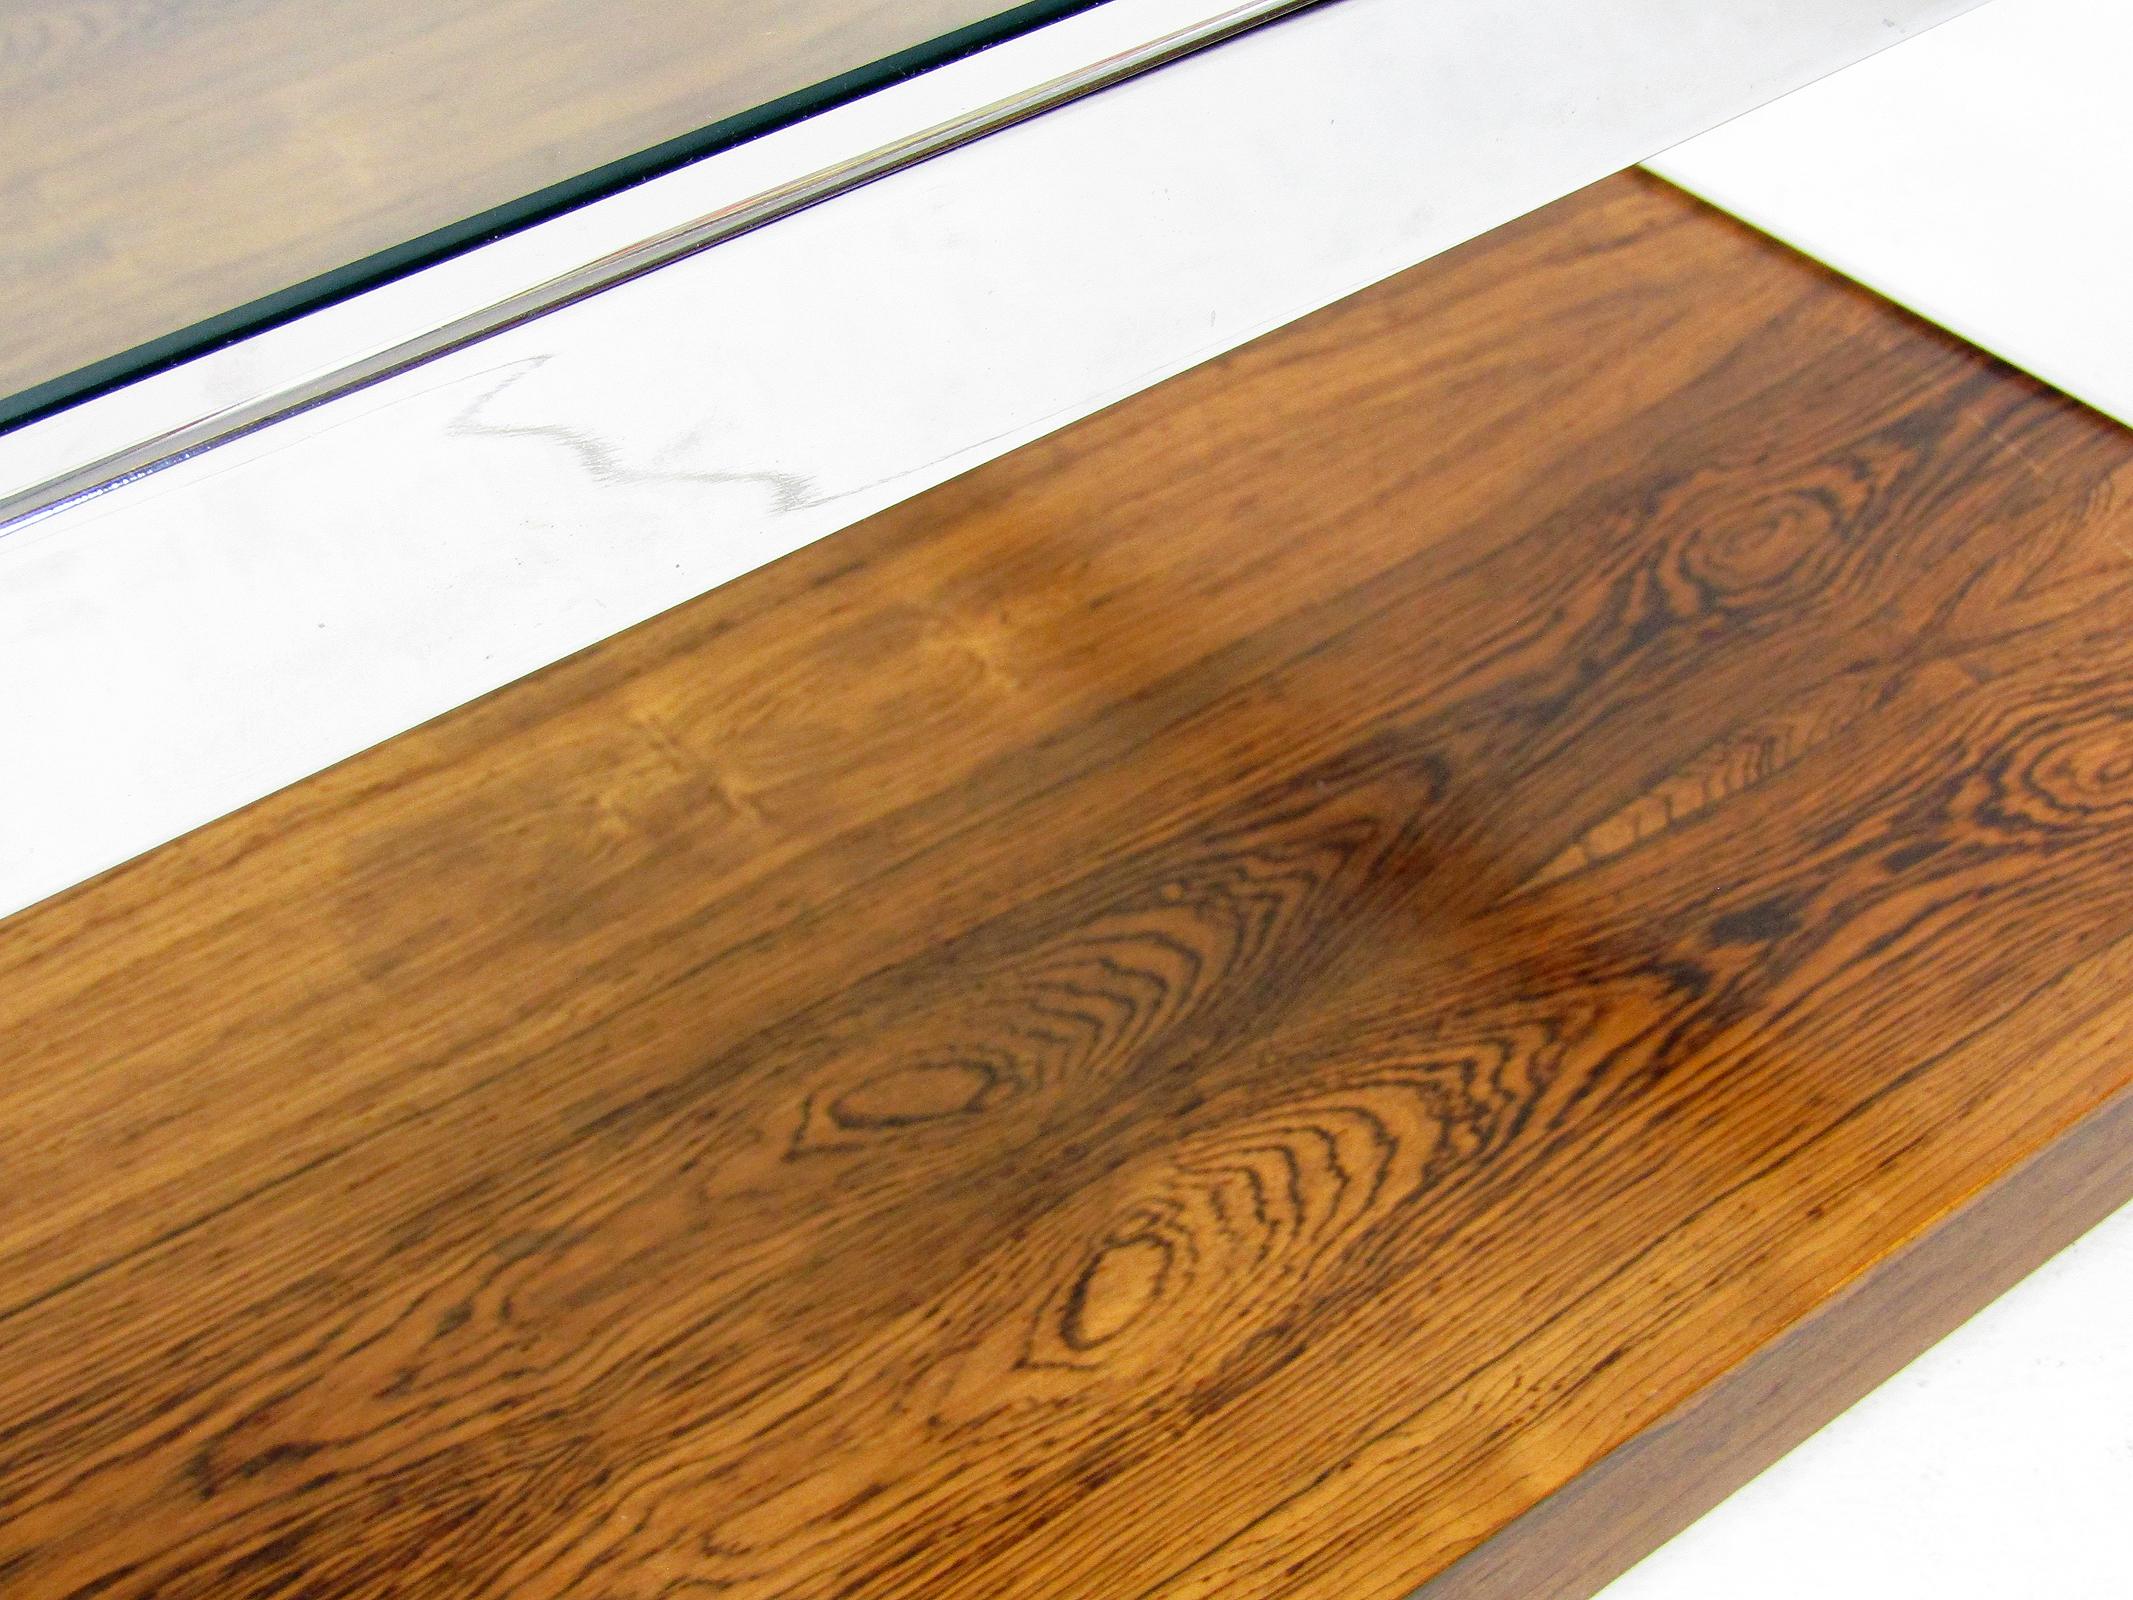 20th Century Large Rosewood & Chrome Coffee Table by Richard Young for Merrow Associates